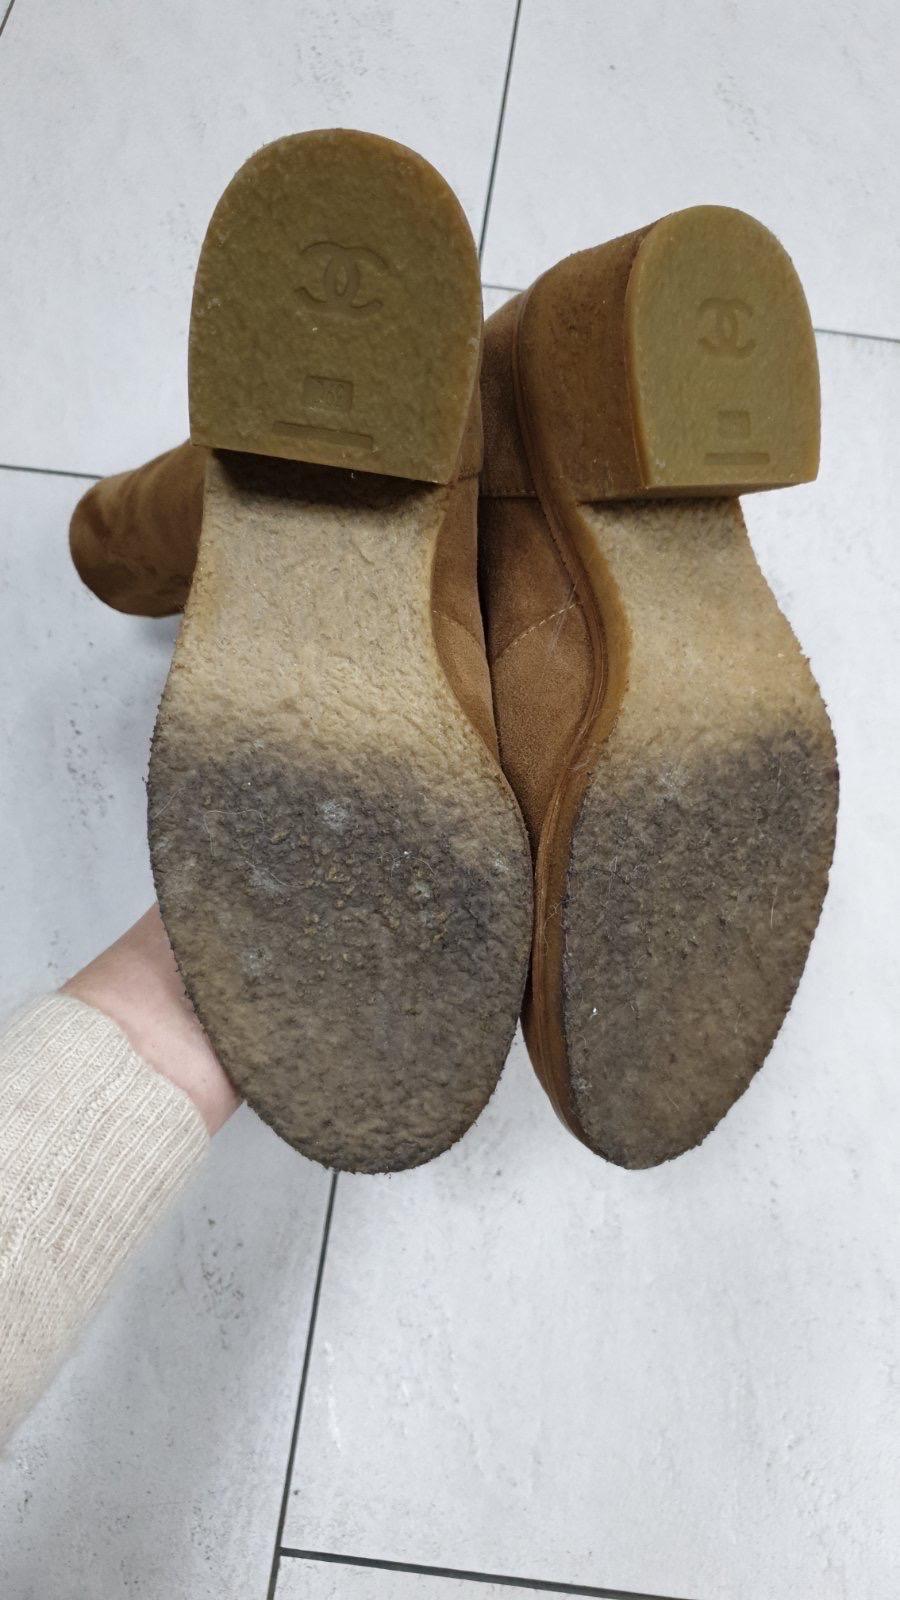 Chanel Camel Suede Fur Boots In Good Condition For Sale In Krakow, PL